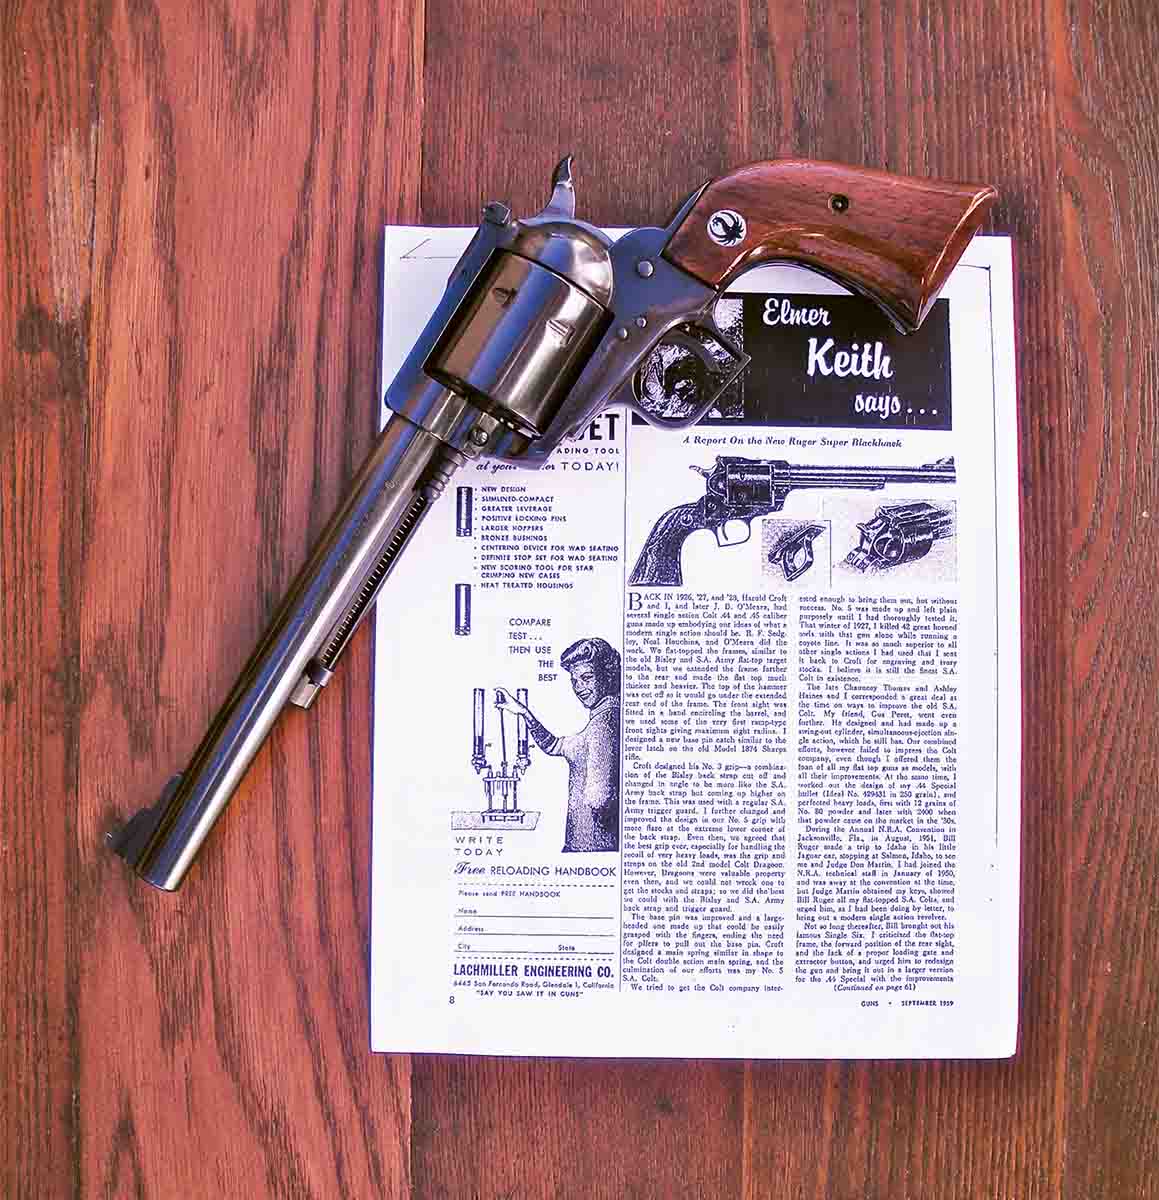 Elmer Keith reviewed the new Ruger Super Blackhawk .44 Magnum in the September 1959 issue of GUNS magazine, but did not mention bears.